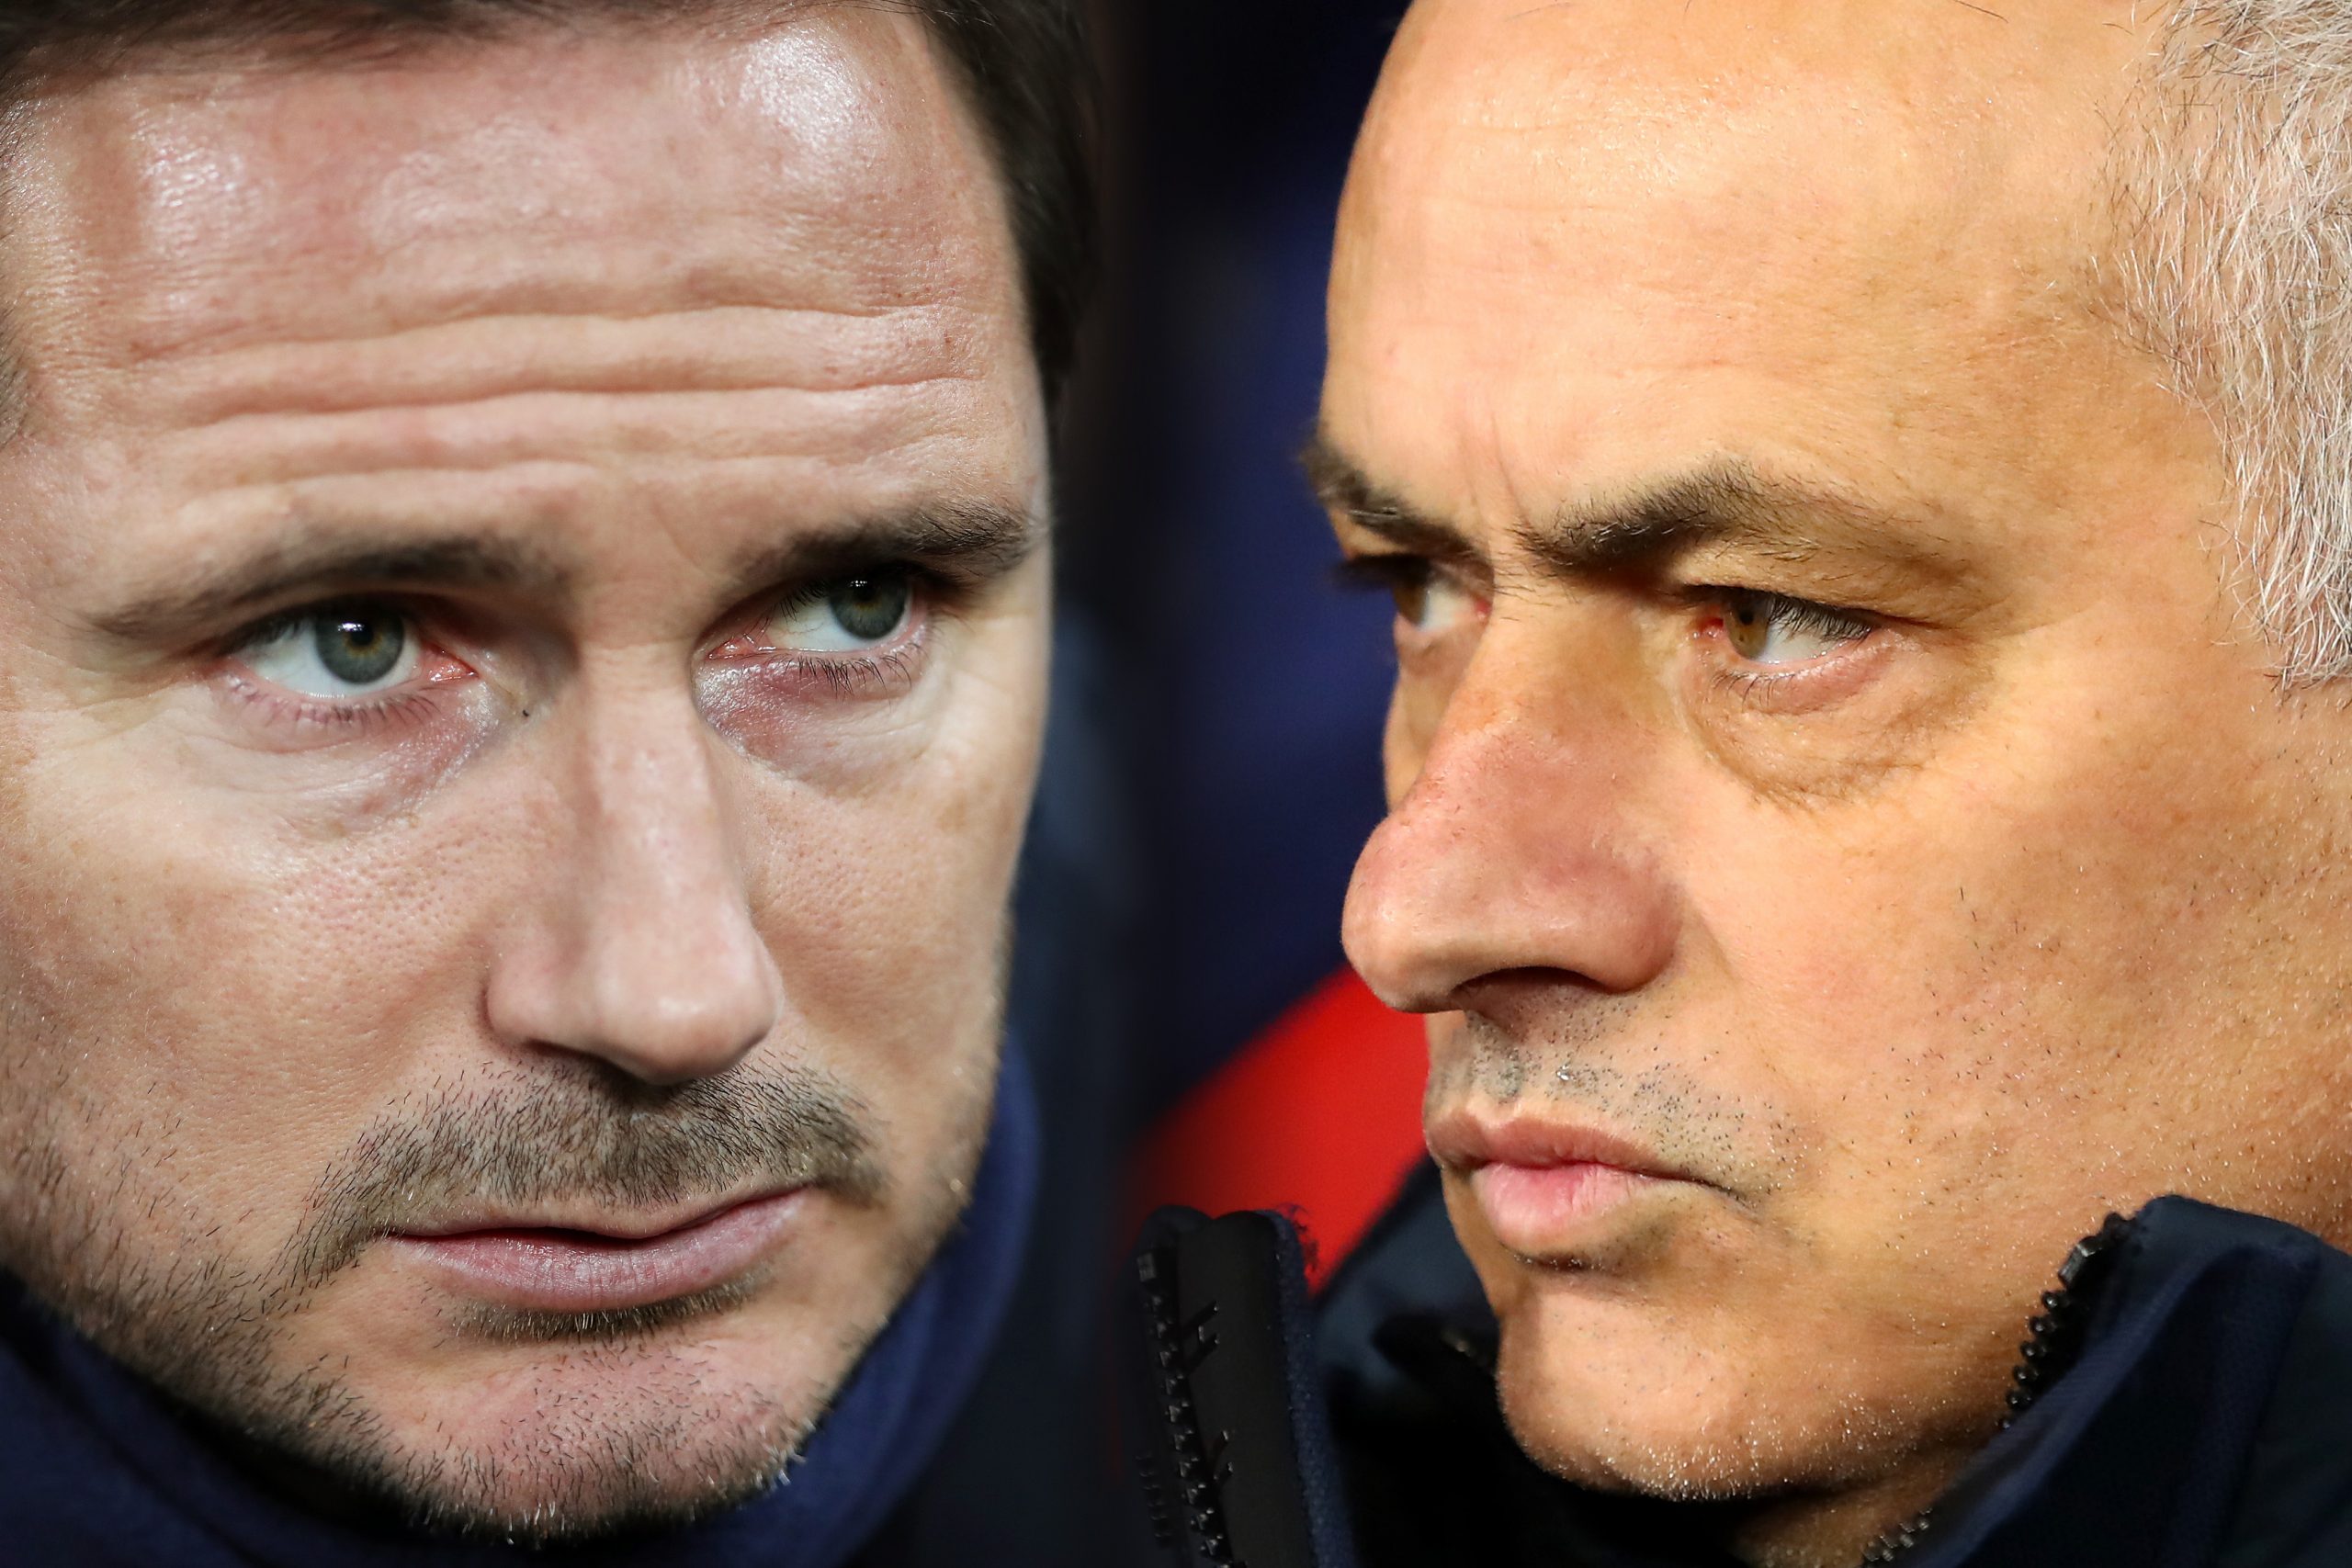 Jose Mourinho won 3 titles in his two stints at Chelsea. The Portuguese believes the same pressure should be put on new Chelsea boss Frank Lampard. (GETTY Images) Mind Games